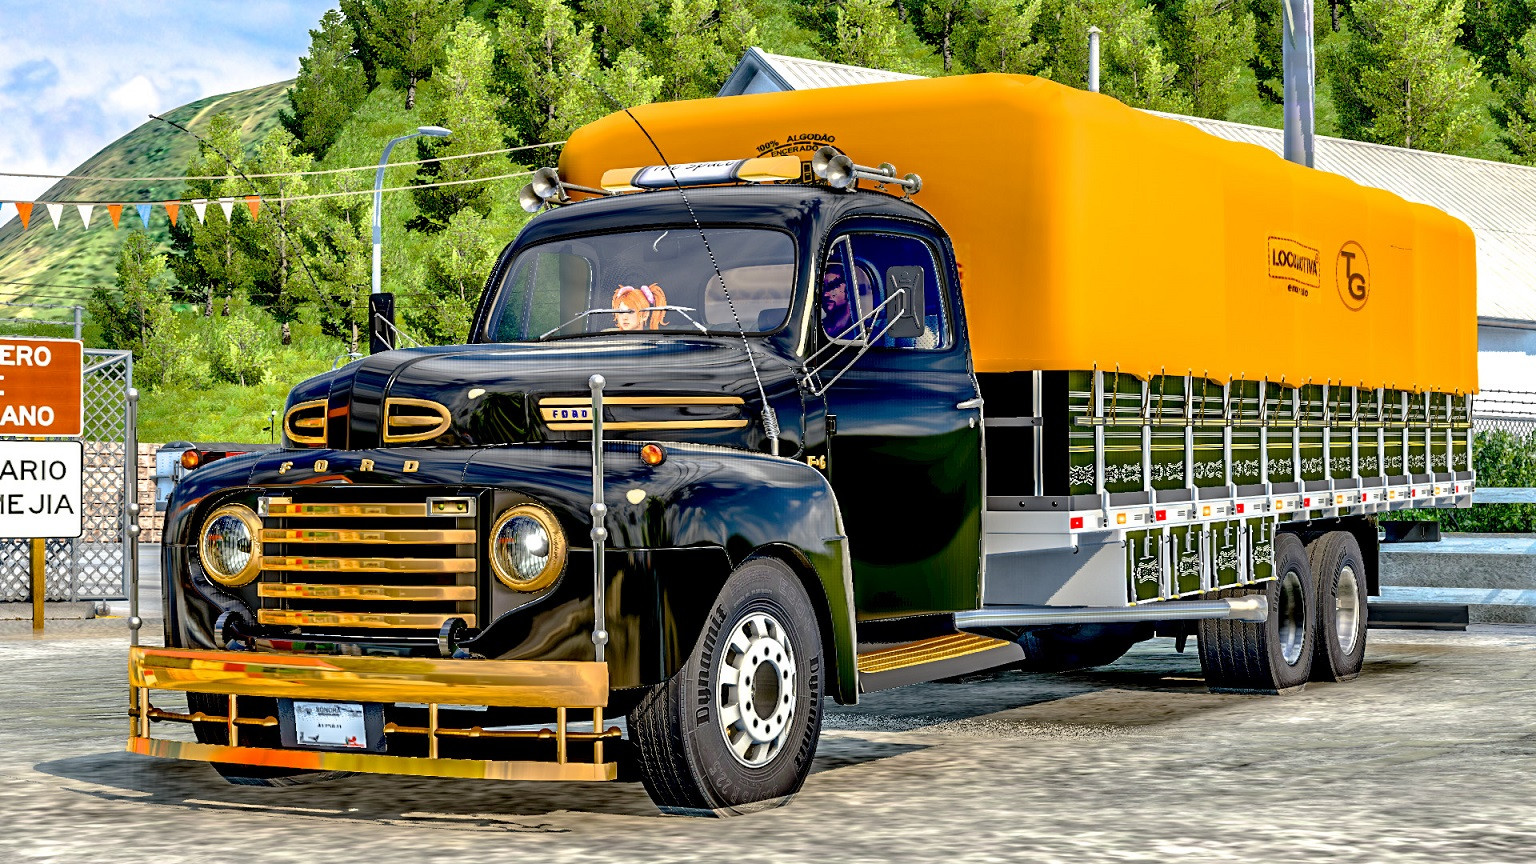 FORD F6 1941 OLD TRUCK MOD - ATS 1.42